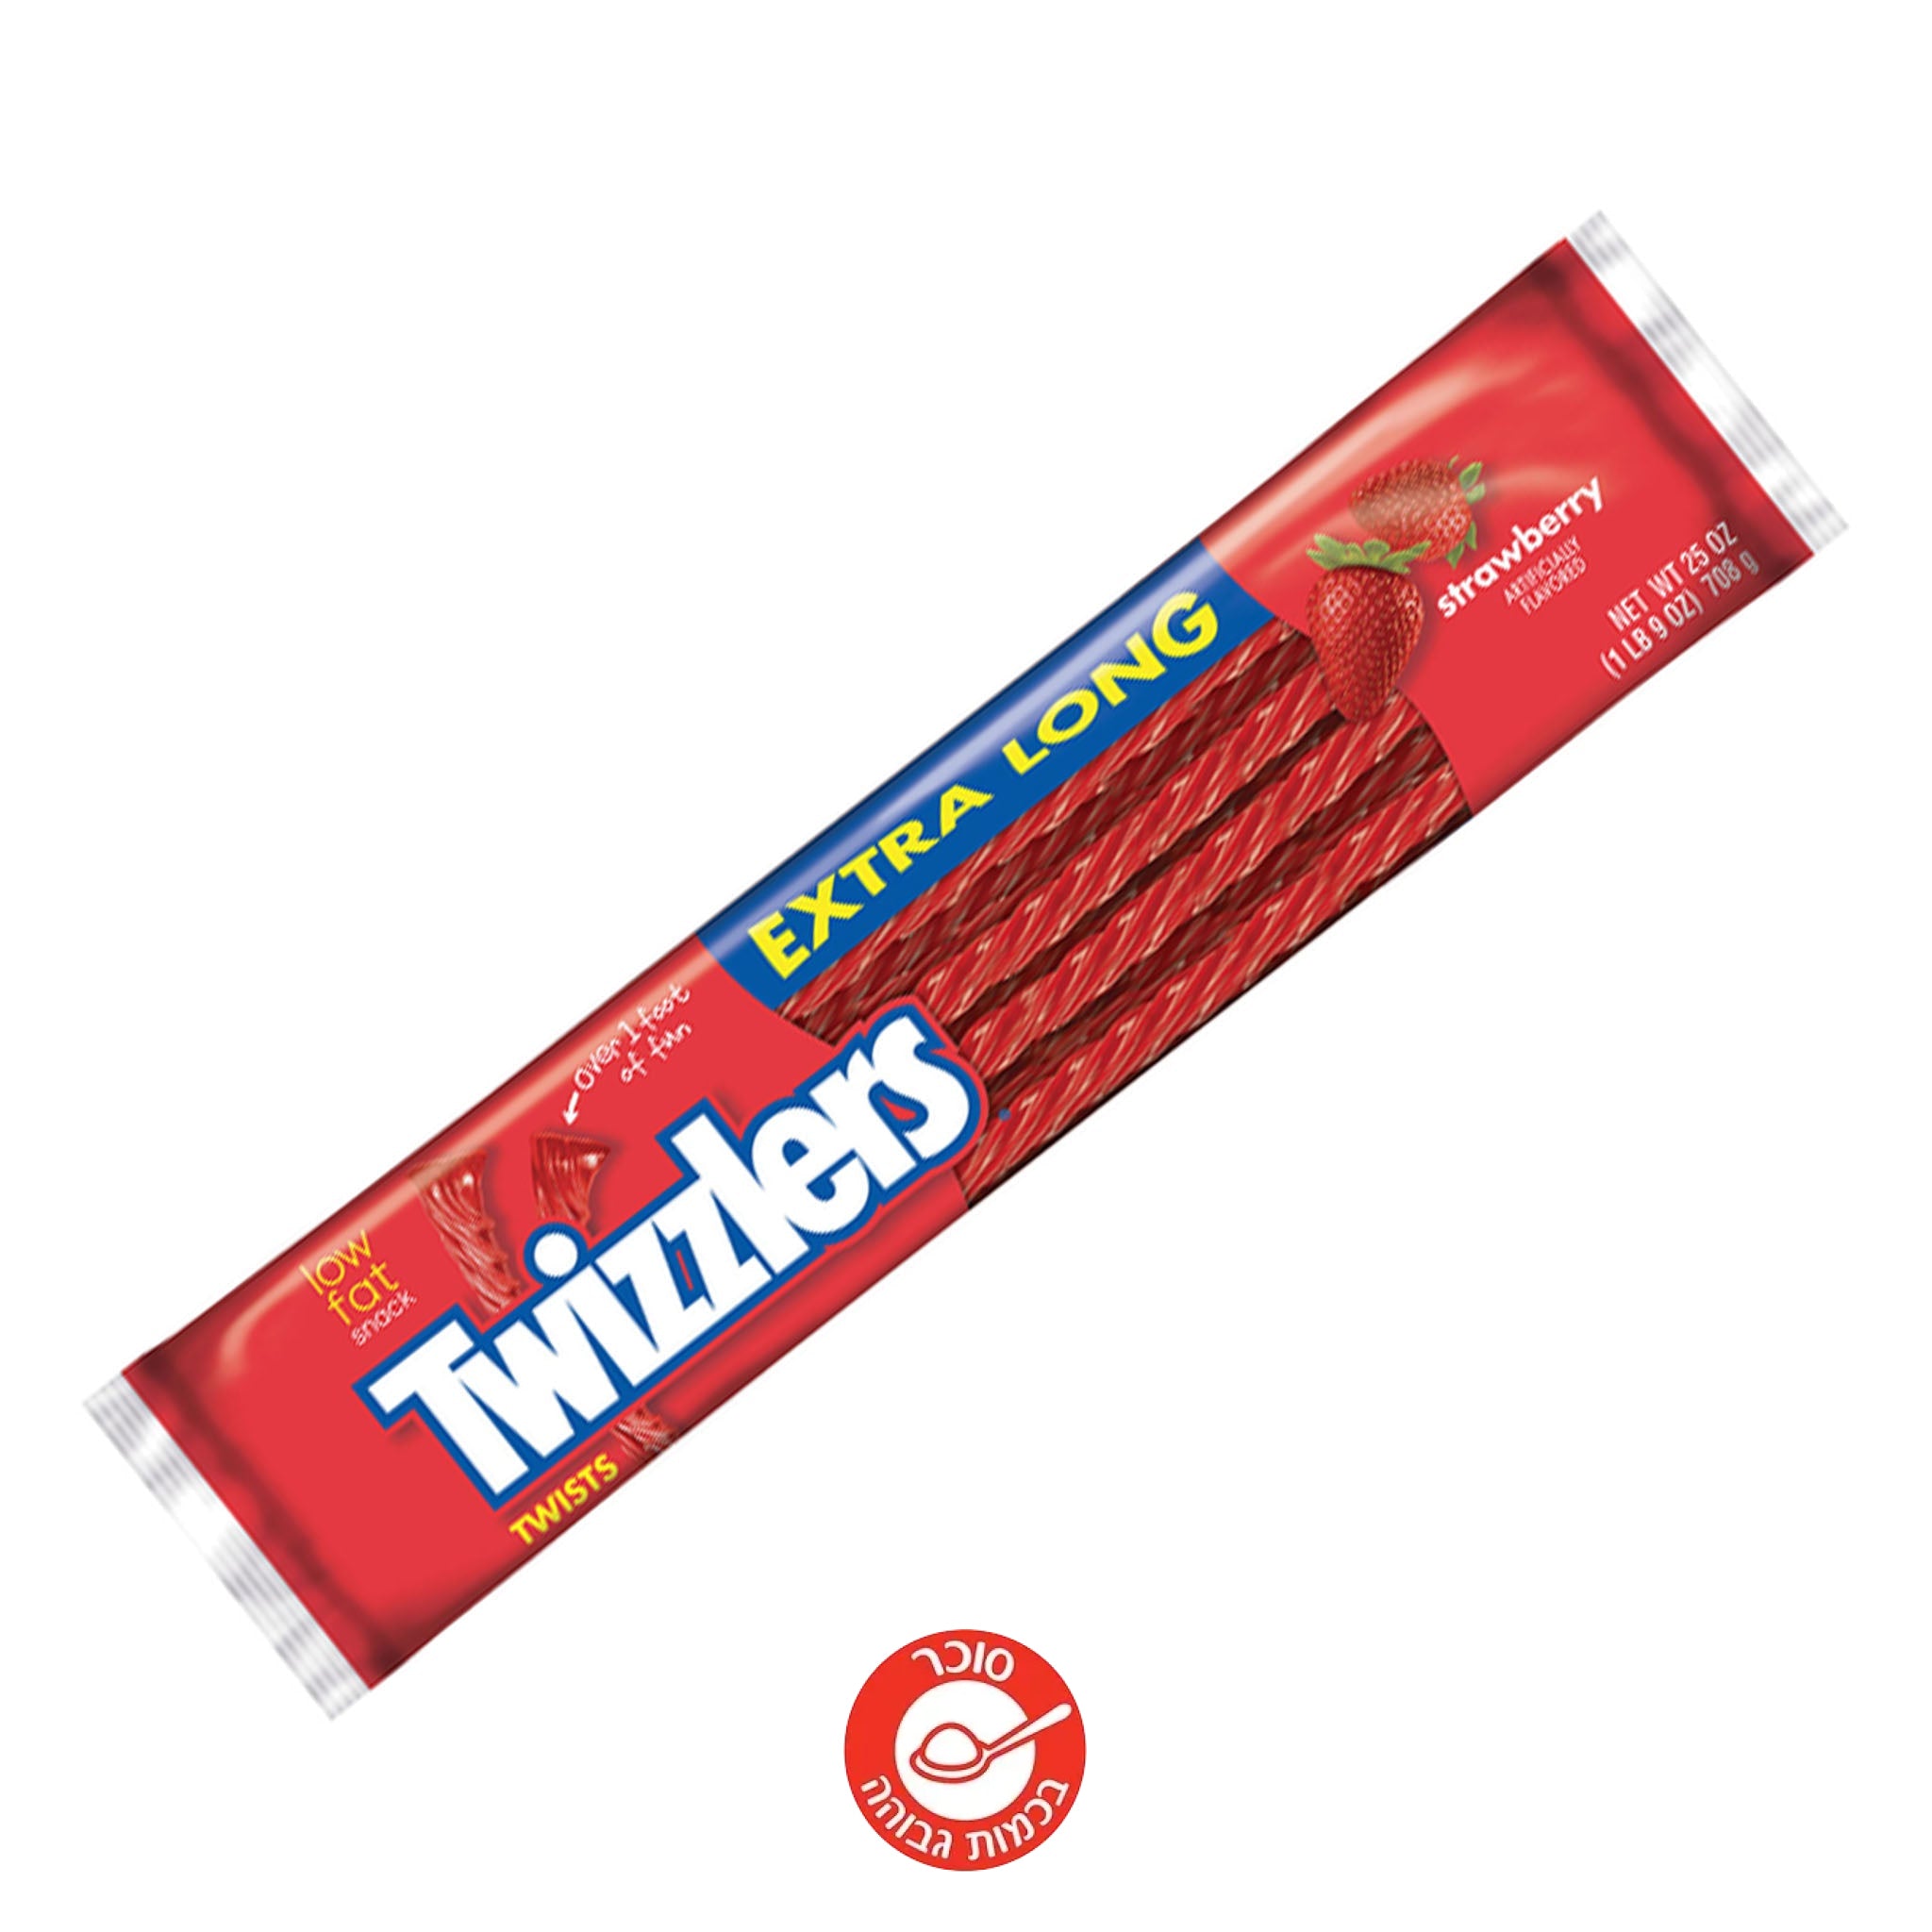 Hershey’s Twizzlers Extra Long טוייזלרס ארוכים Candy & Chocolate